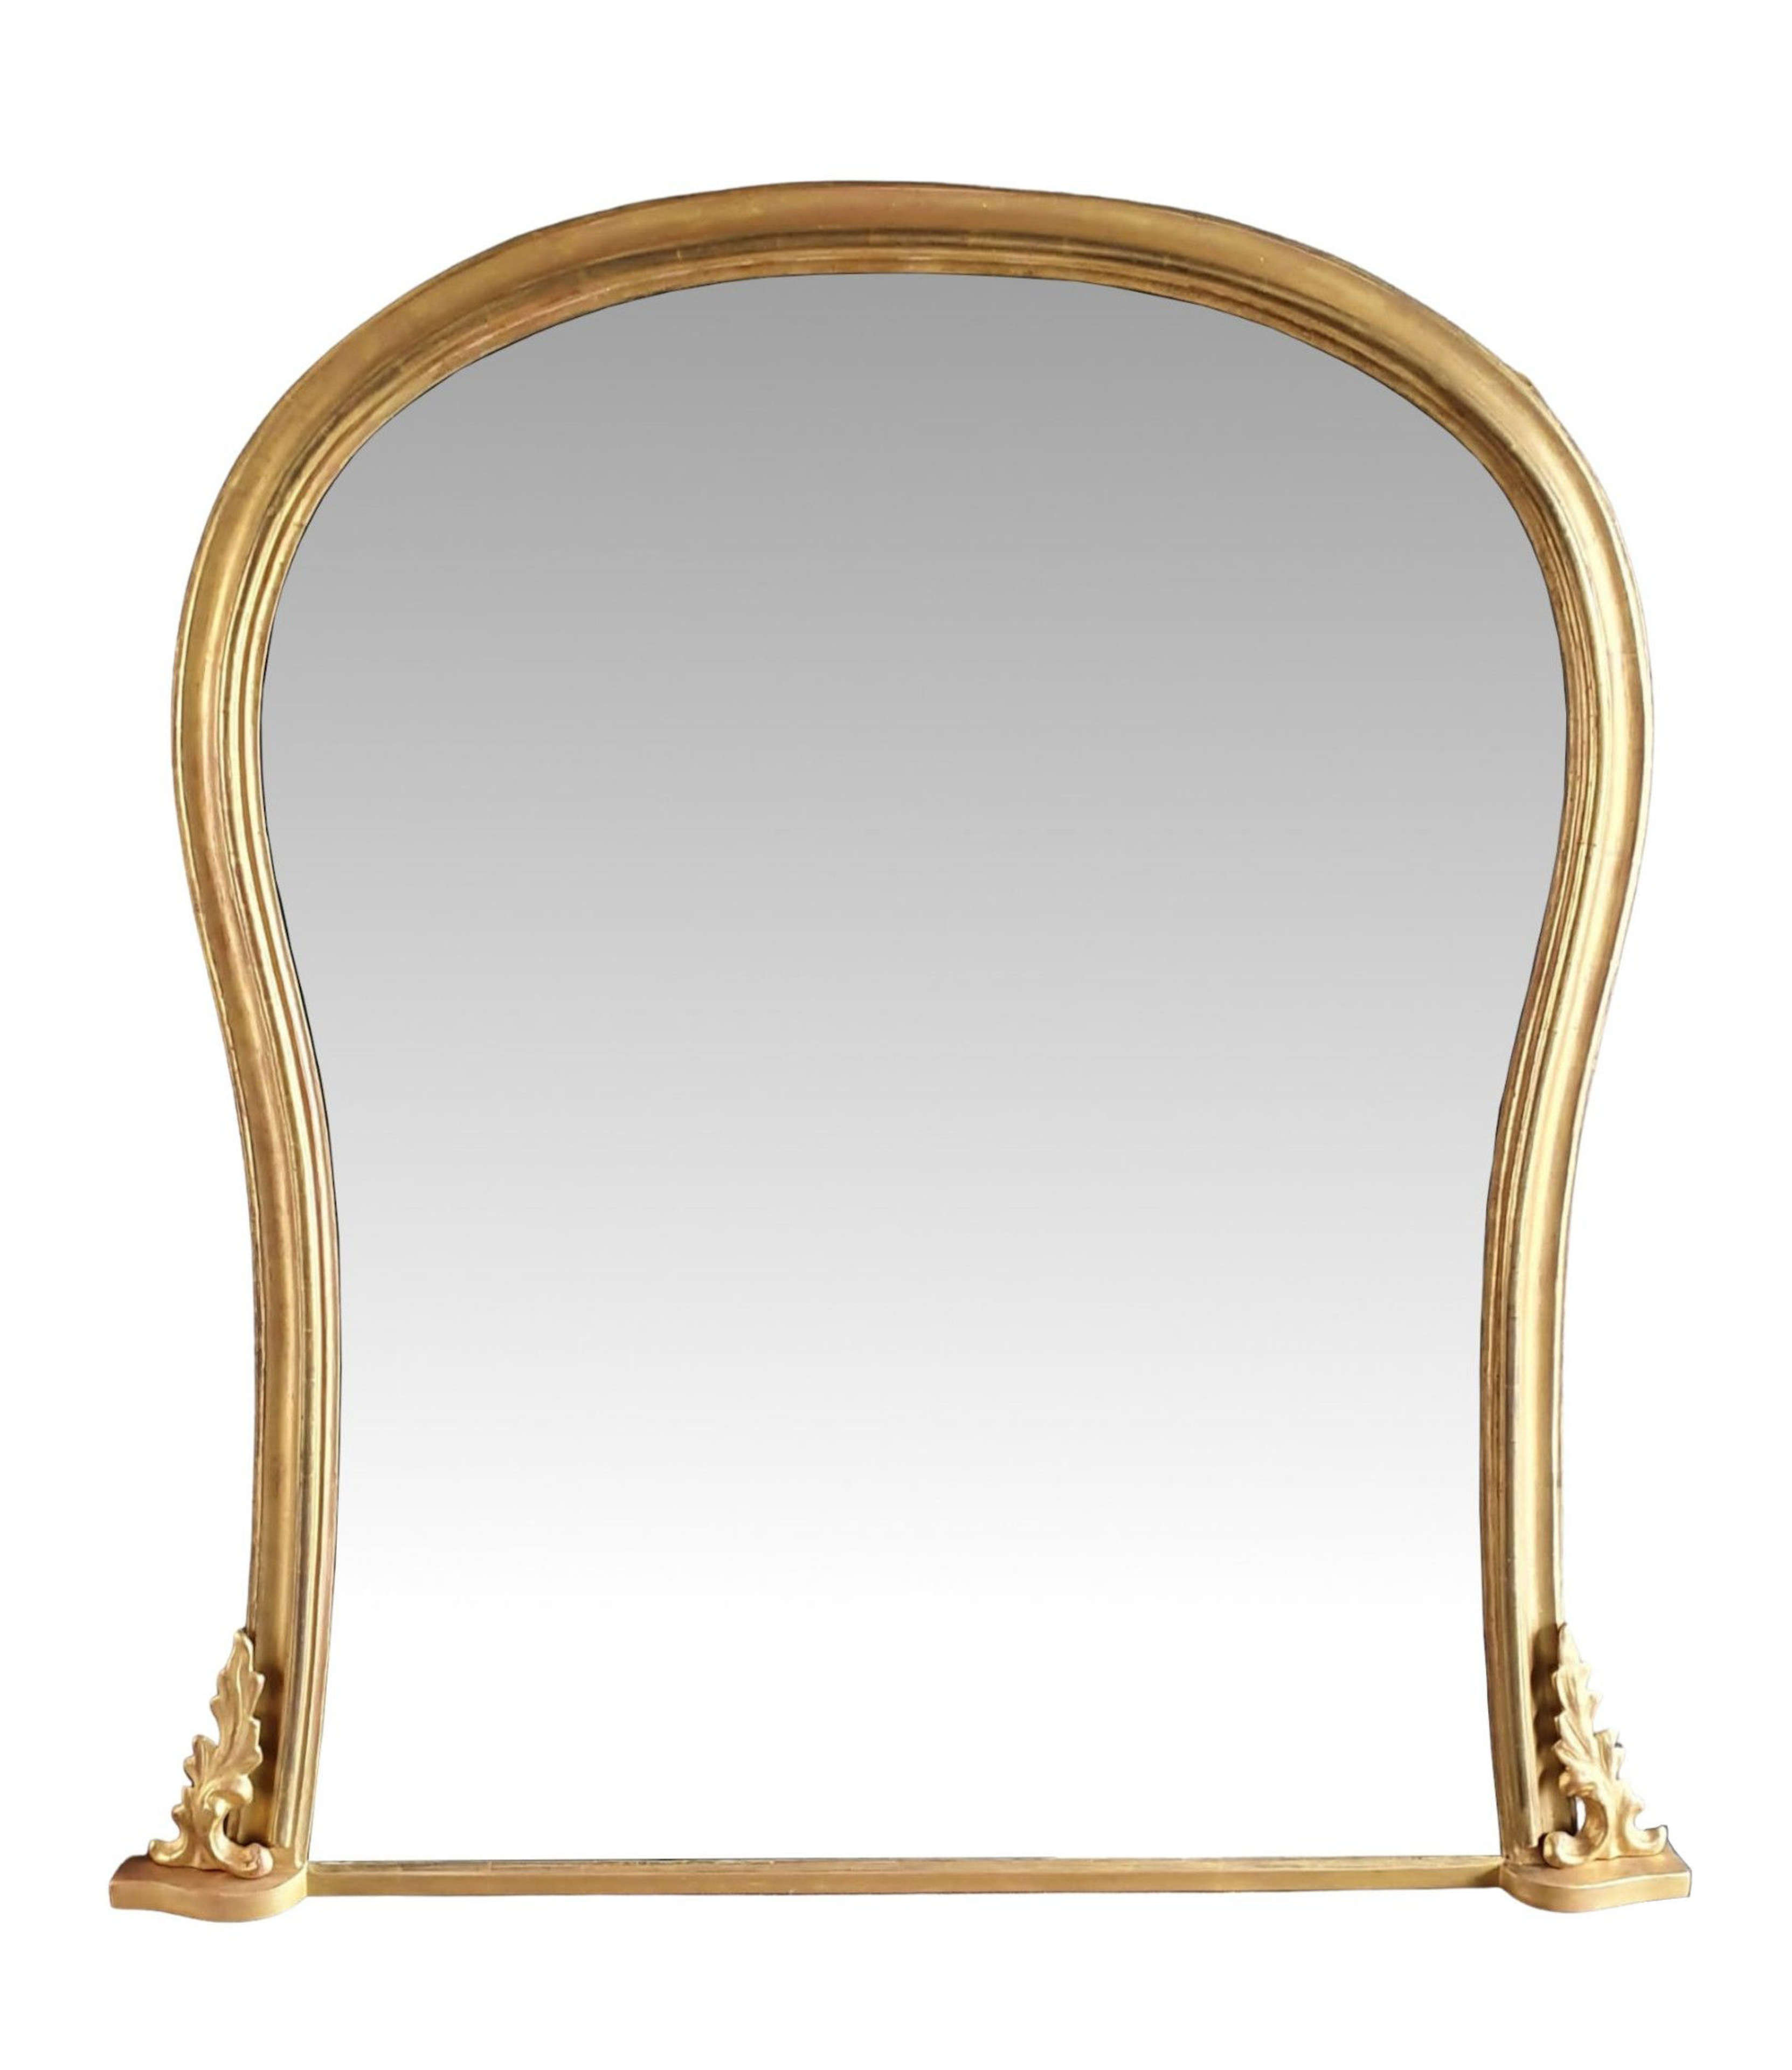 A Beautiful 19th Century Waisted Giltwood Overmantle Mirror